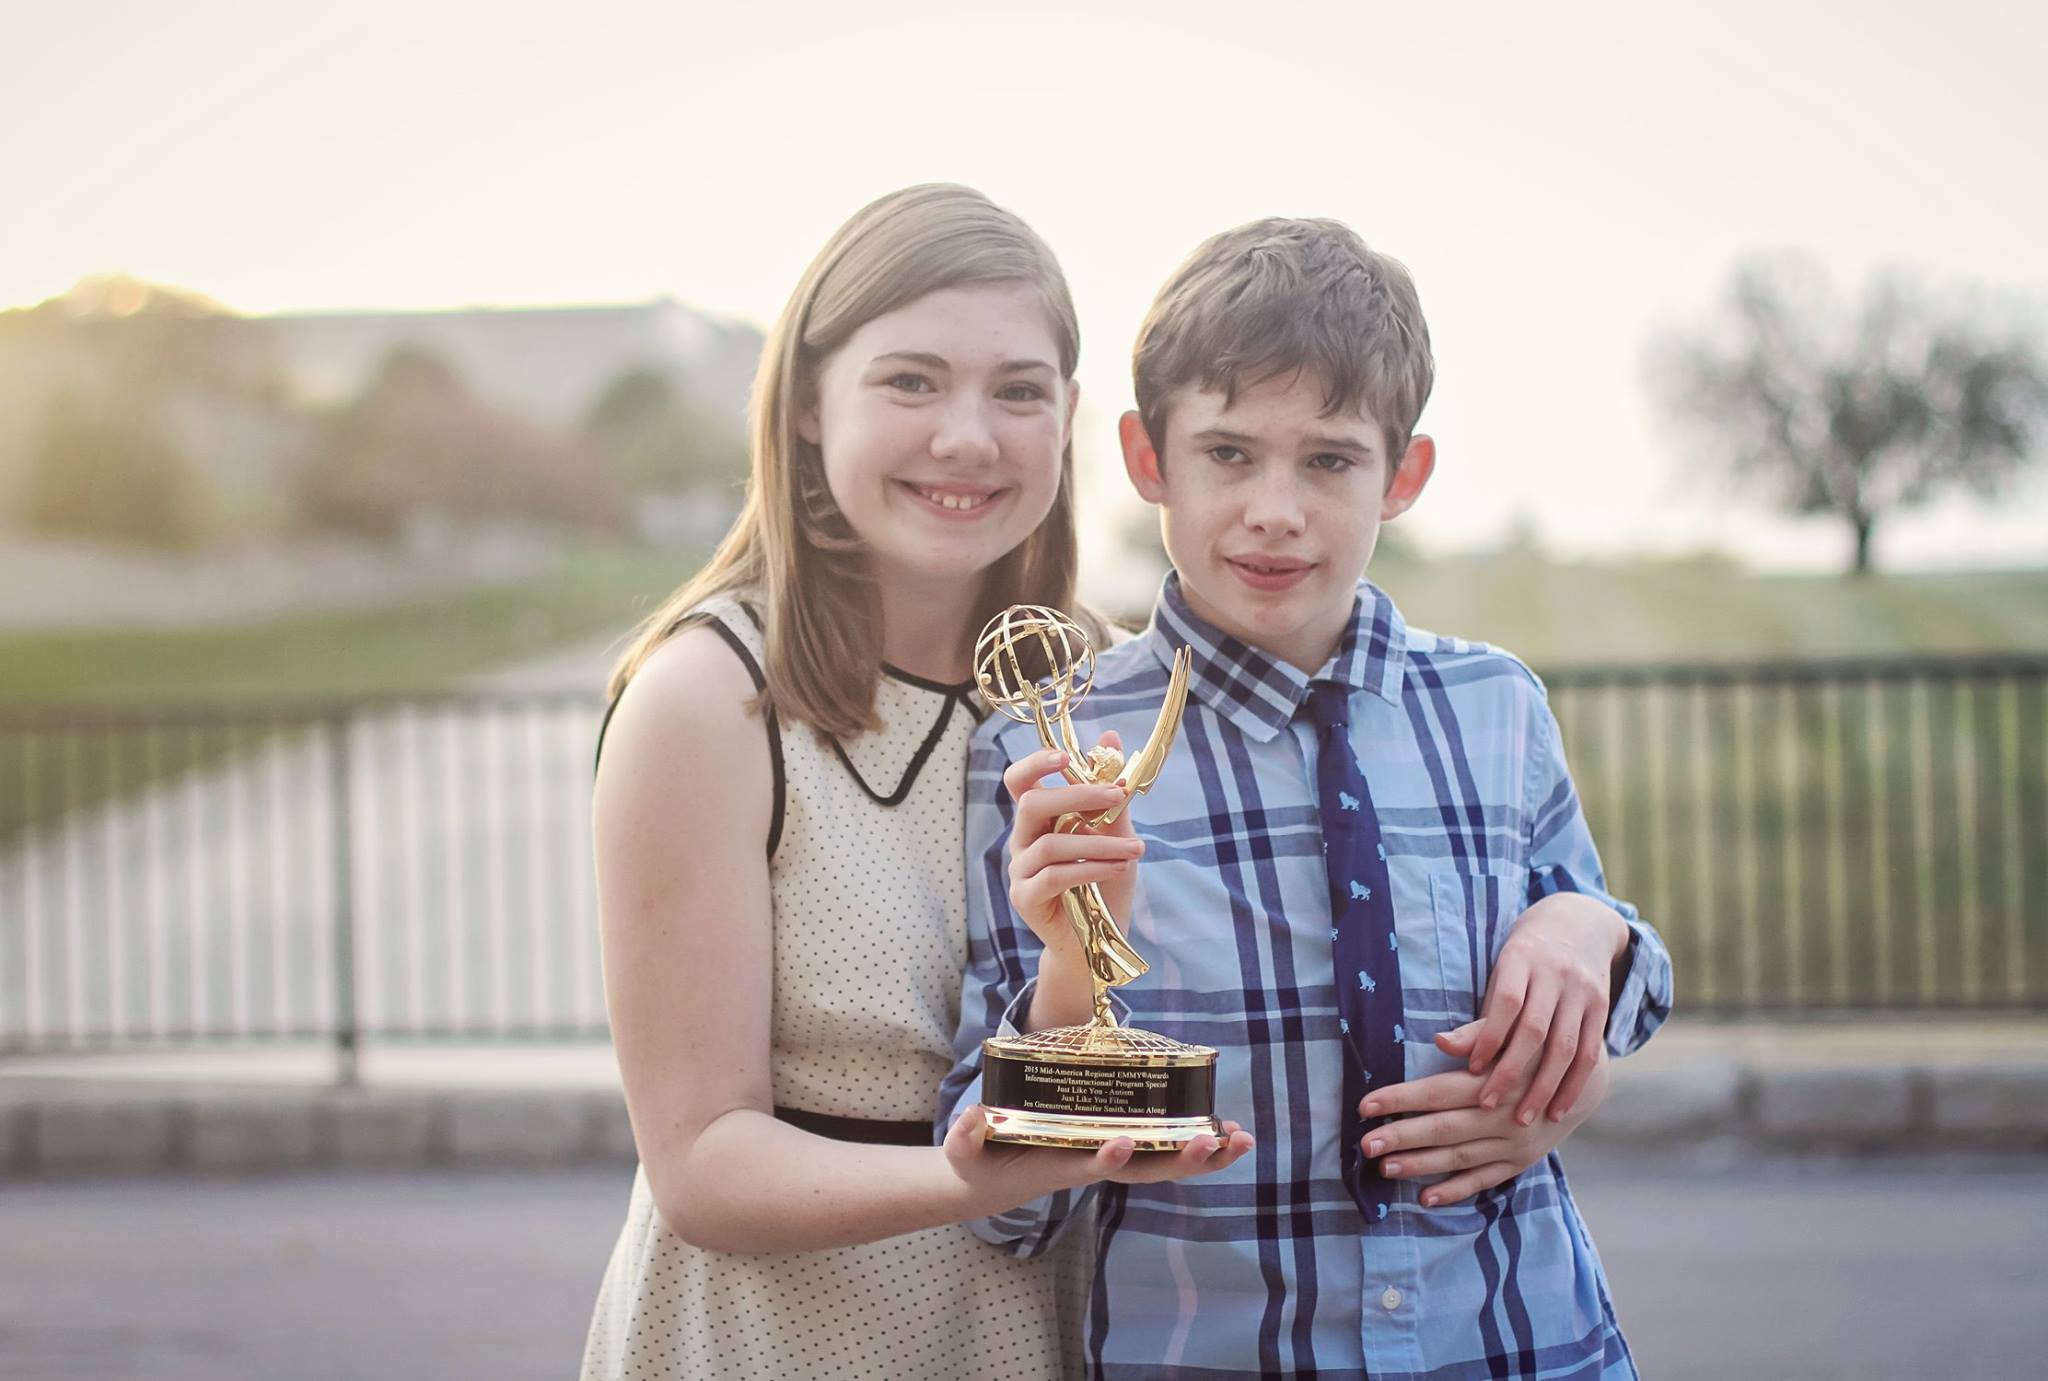 Addison & Christian Landes at an event for Just Like You Autism winner of two Mid-America Emmy awards.